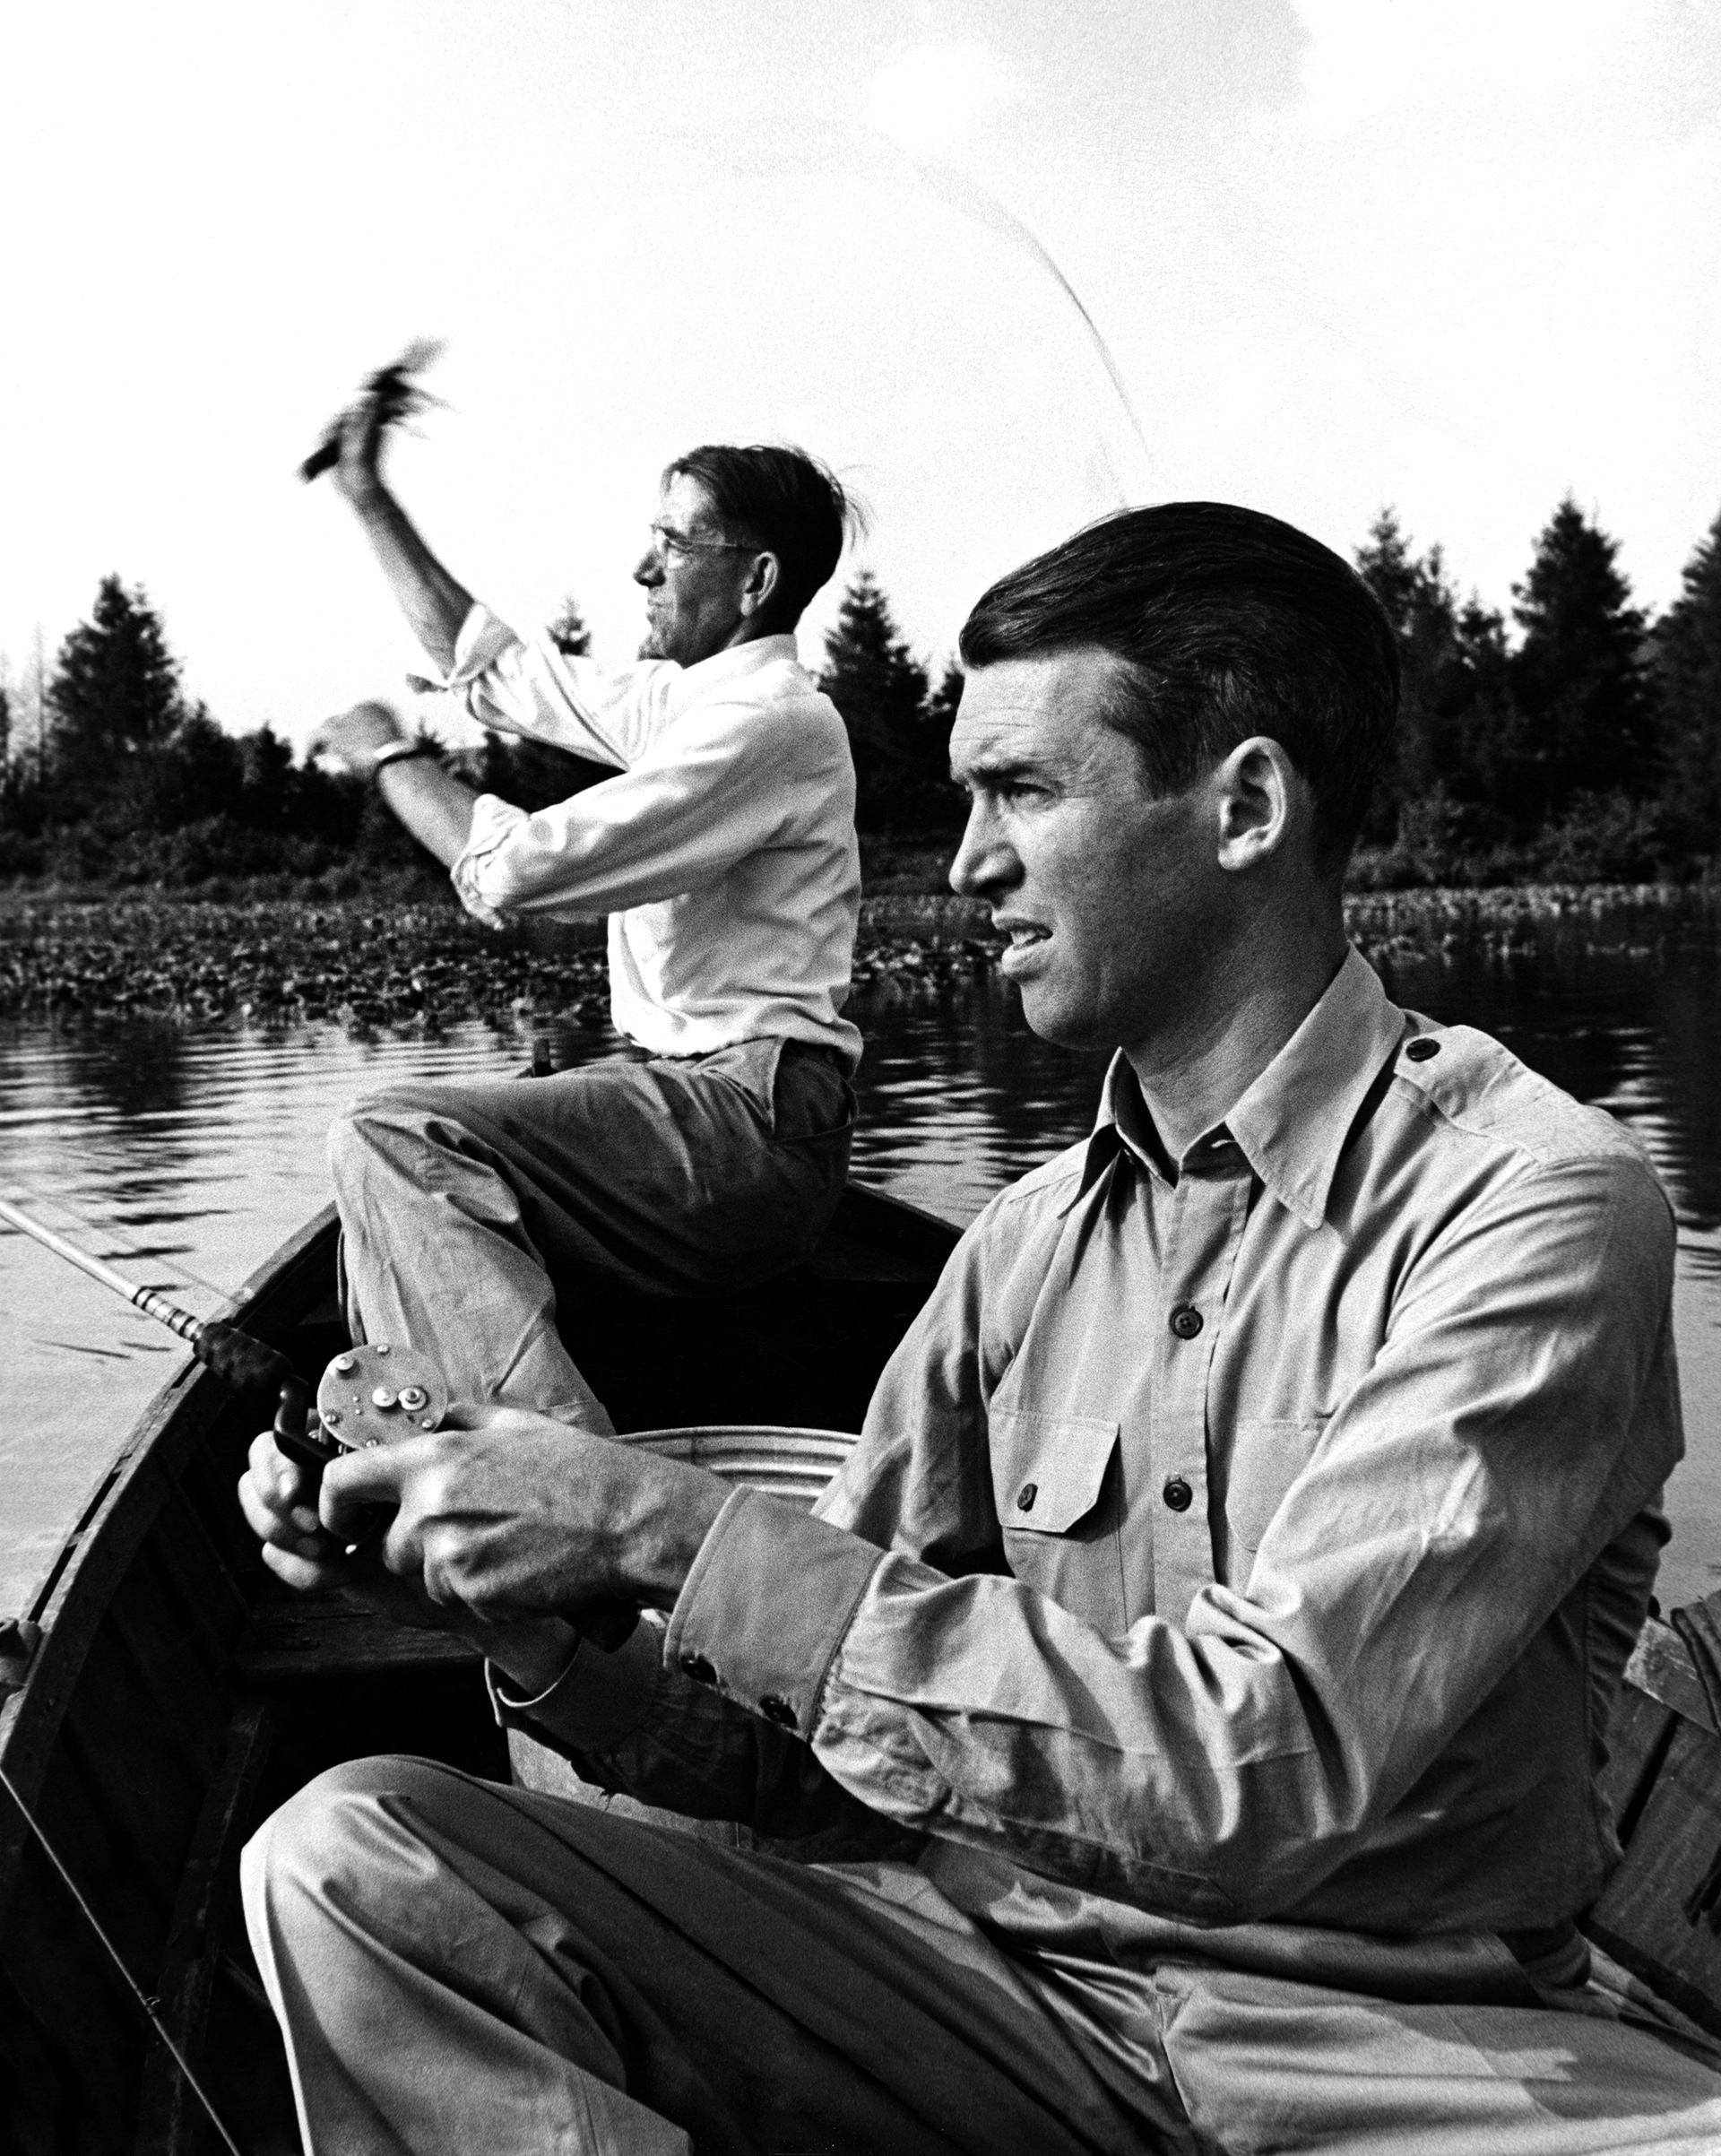 Jimmy Stewart (R) bass fishing with his friend Clyde "Woodie" Woodward, upon his return from WWII, 1945.